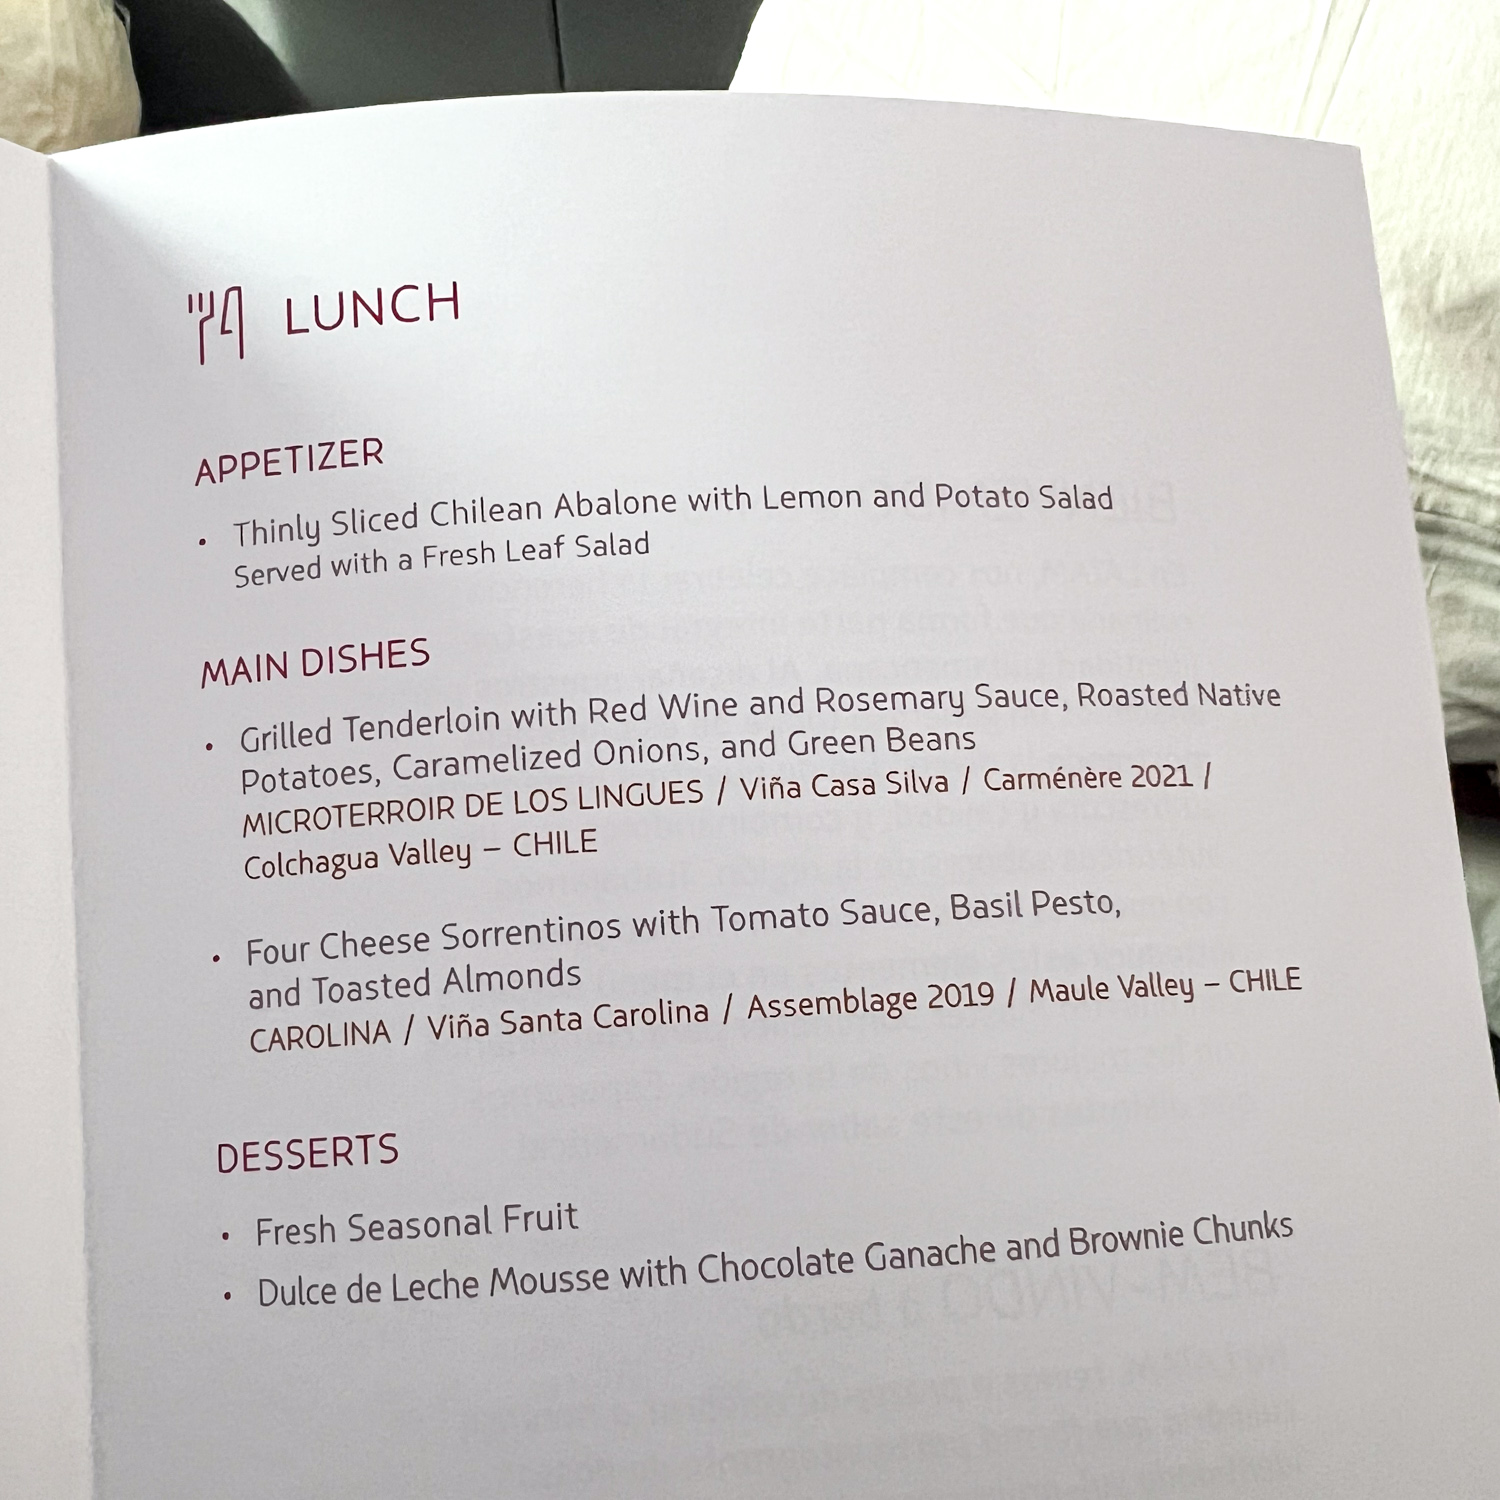 LATAM Business Class lunch menu on our flight to Easter Island.